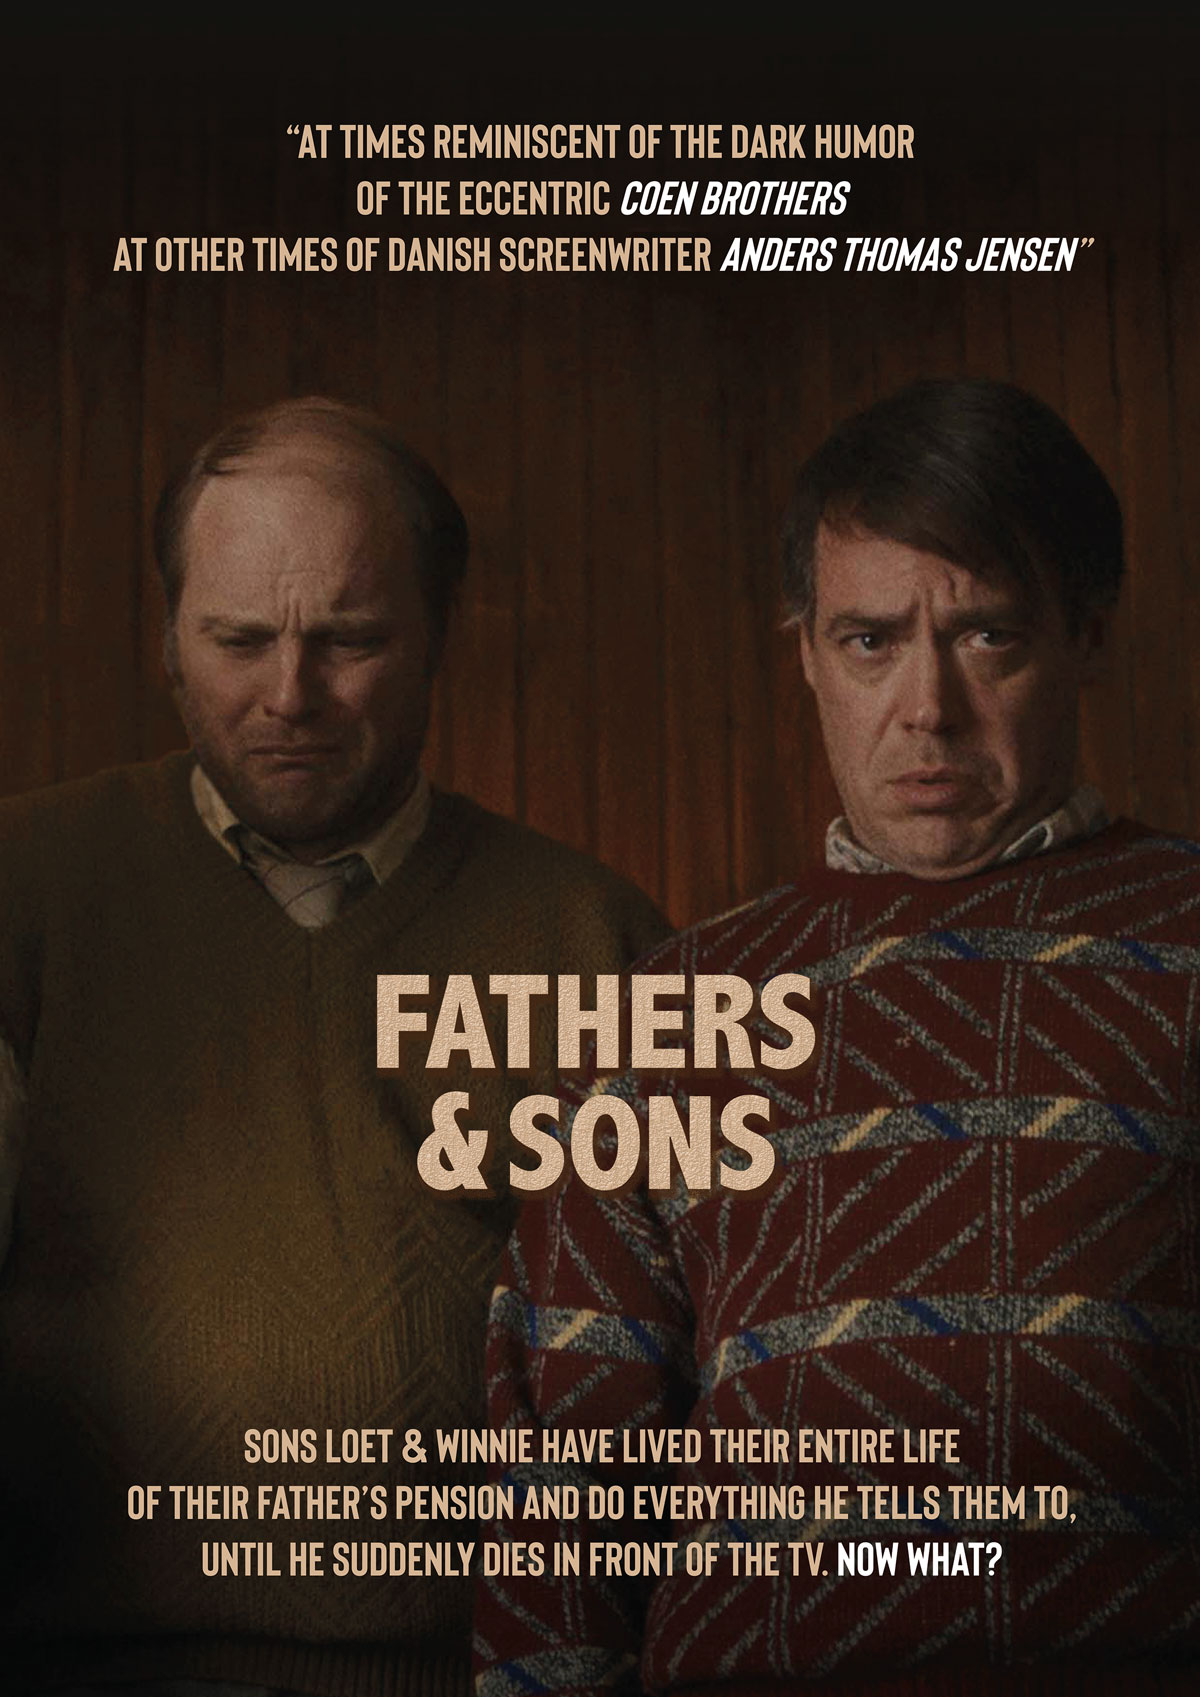 FathersSons poster